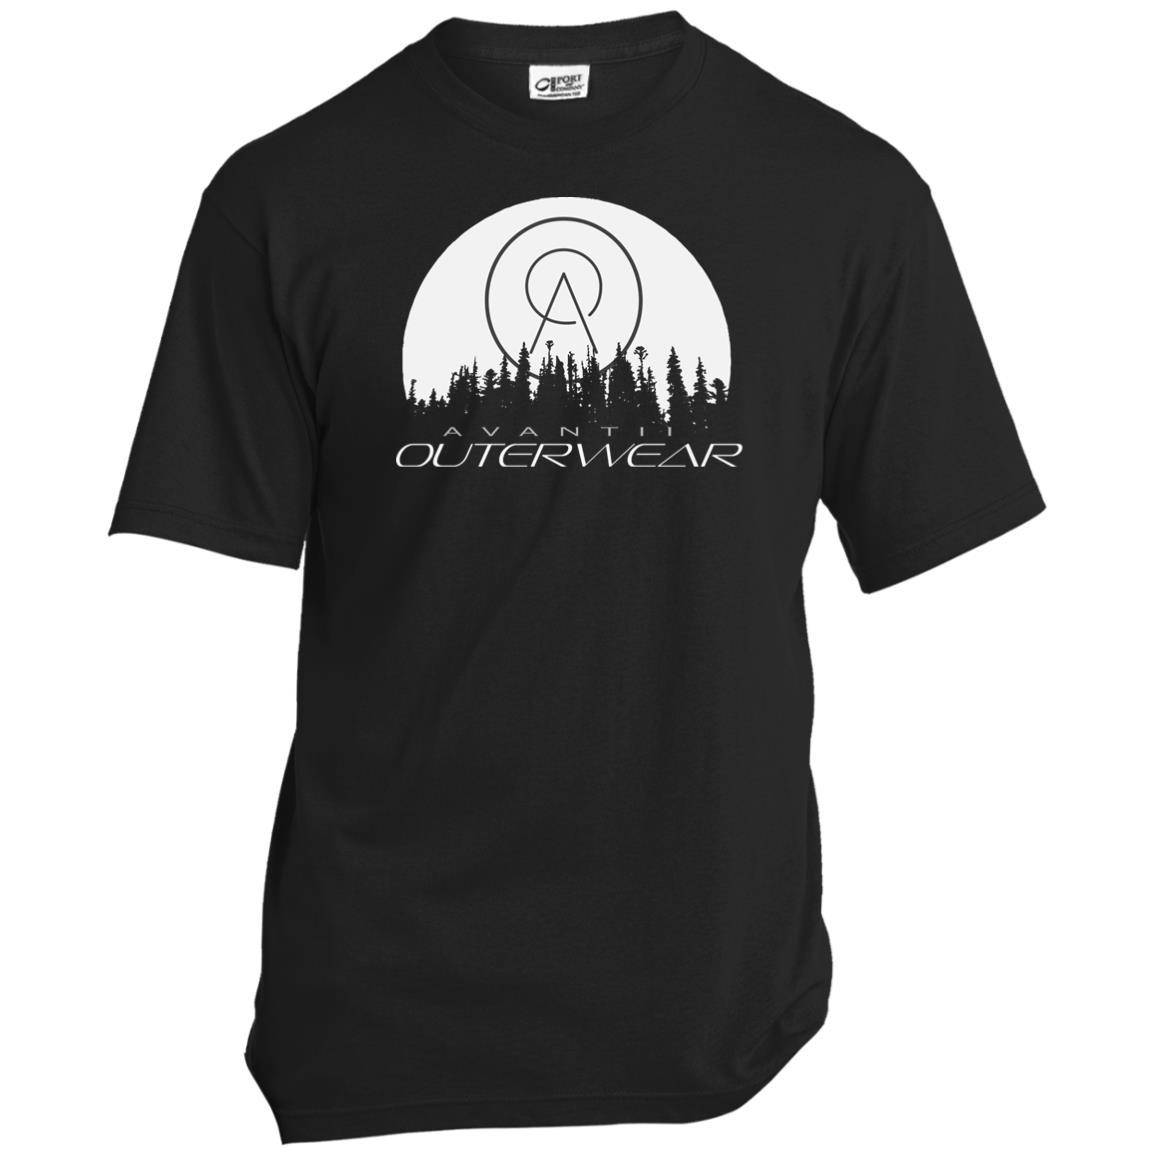 The Silhouette Trees T-Shirt | Avantii Outerwear